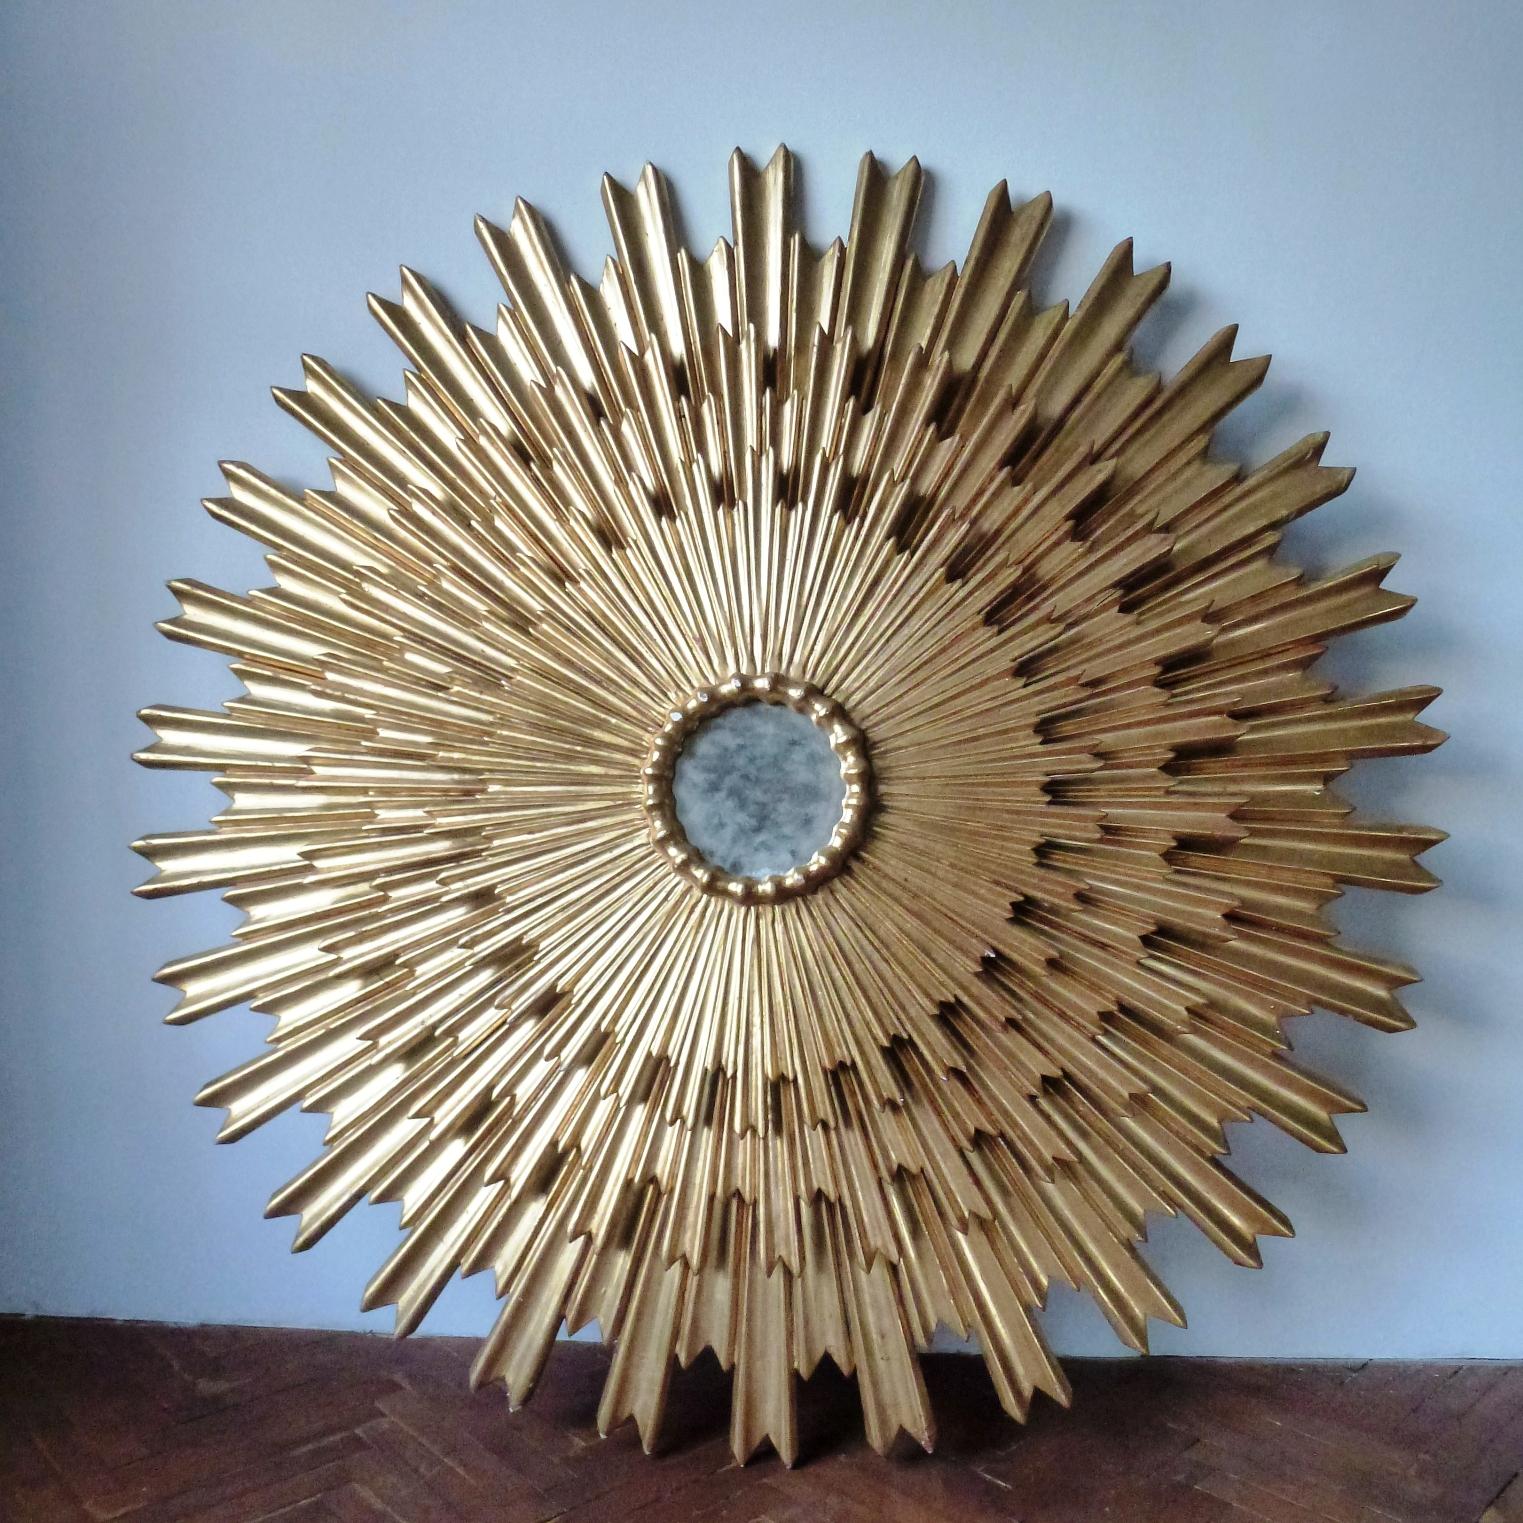 Huge wood carved three tiered sunburst mirror. Gold leaf polished on red bolus. 
Has minor wear signs on different parts and several restoration interventions.
There are visible signs of previous use: scratches, very small cracks and some worn